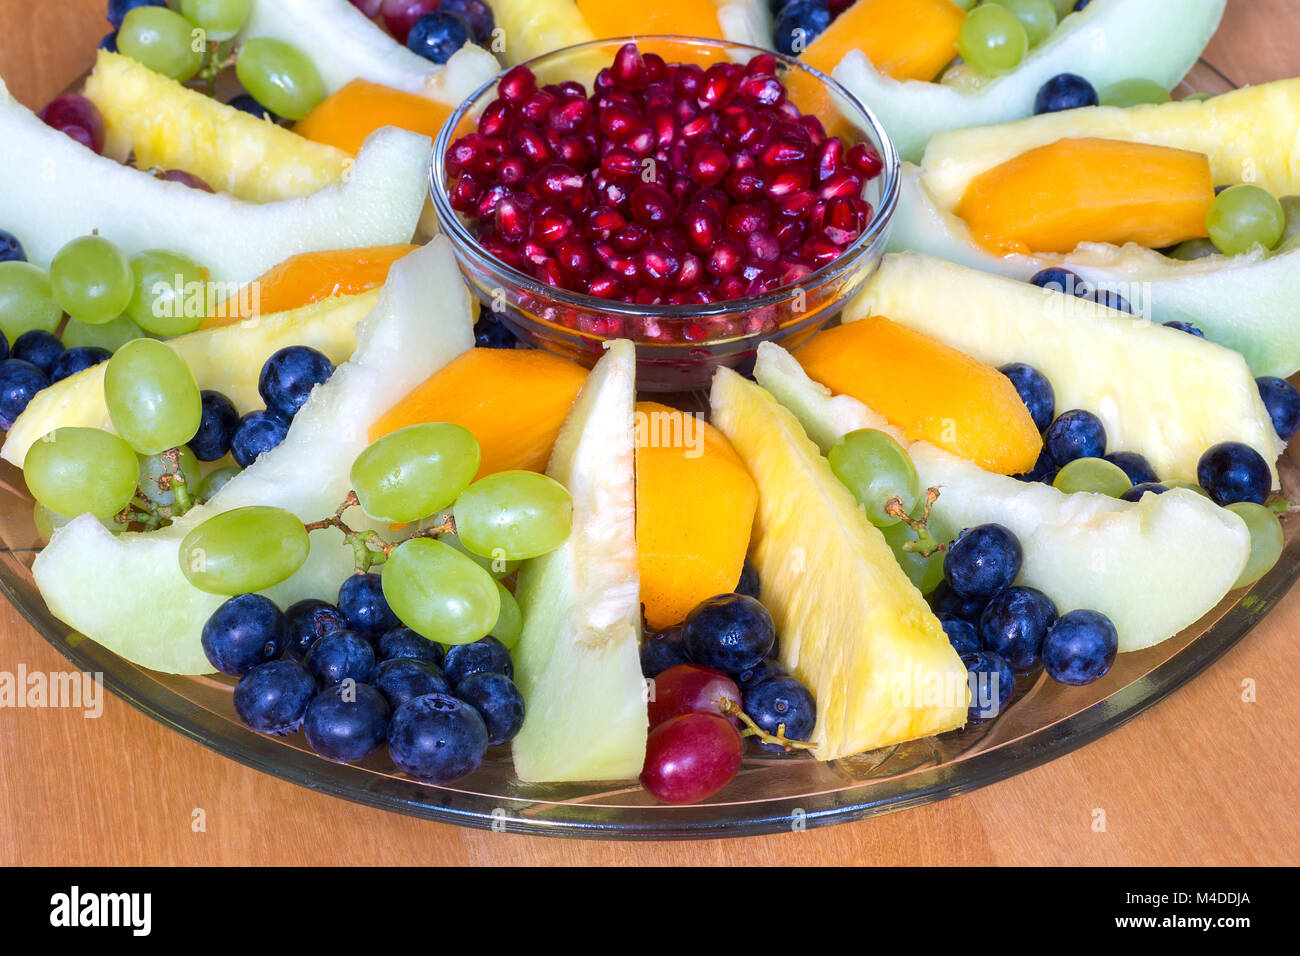 Glass scale full of various fresh fruits Stock Photo